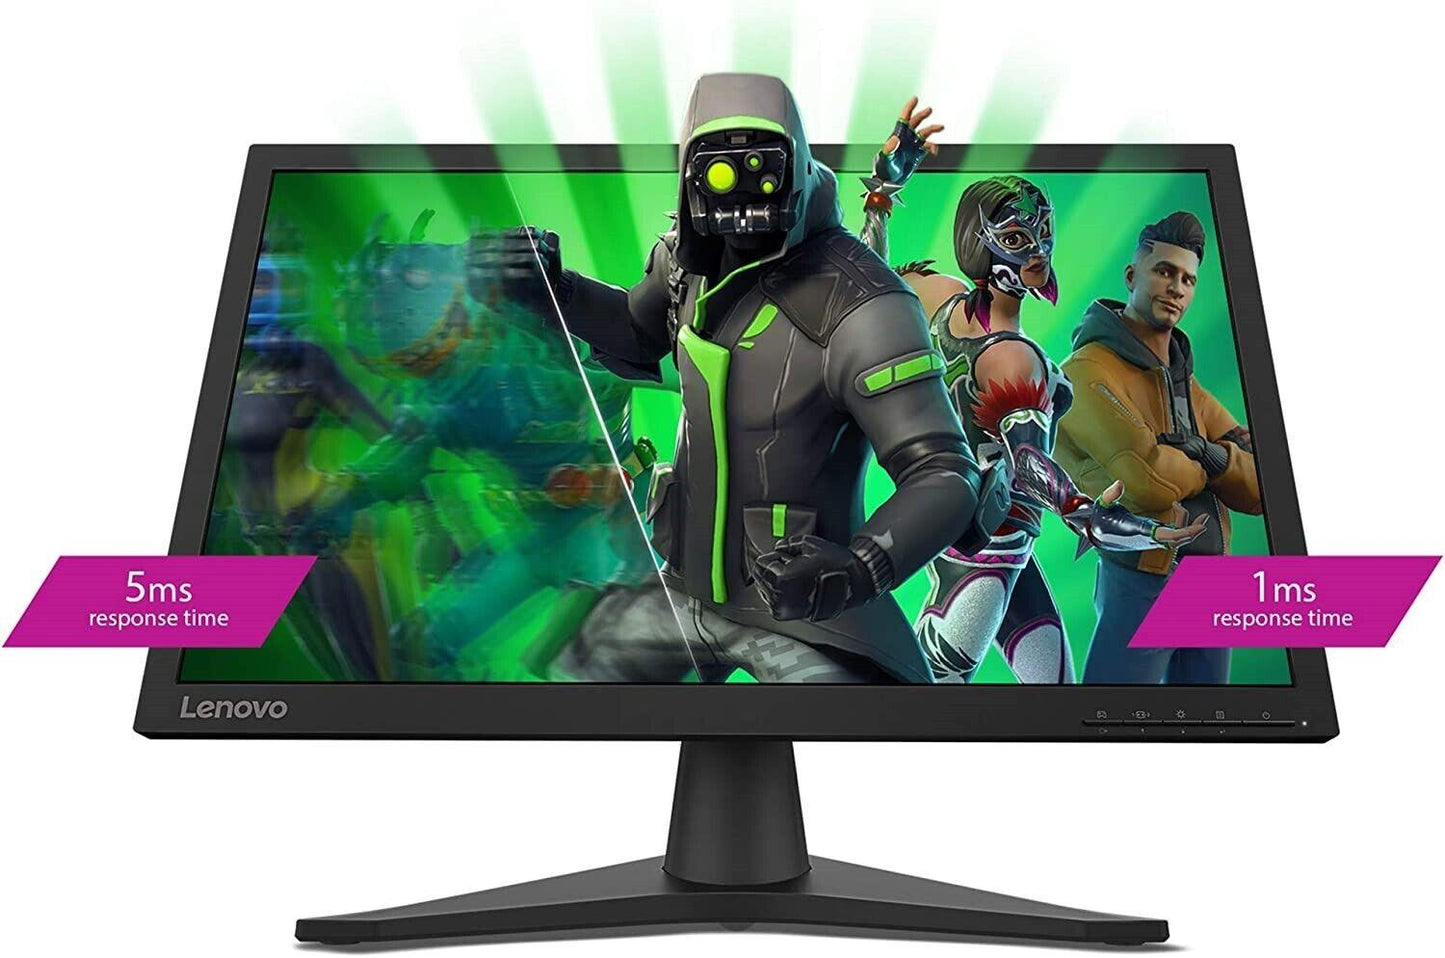 Lenovo G24-10 24-inch FHD up to 144 Hz PC Computer Gaming Monitor U - Smart Clear Vision